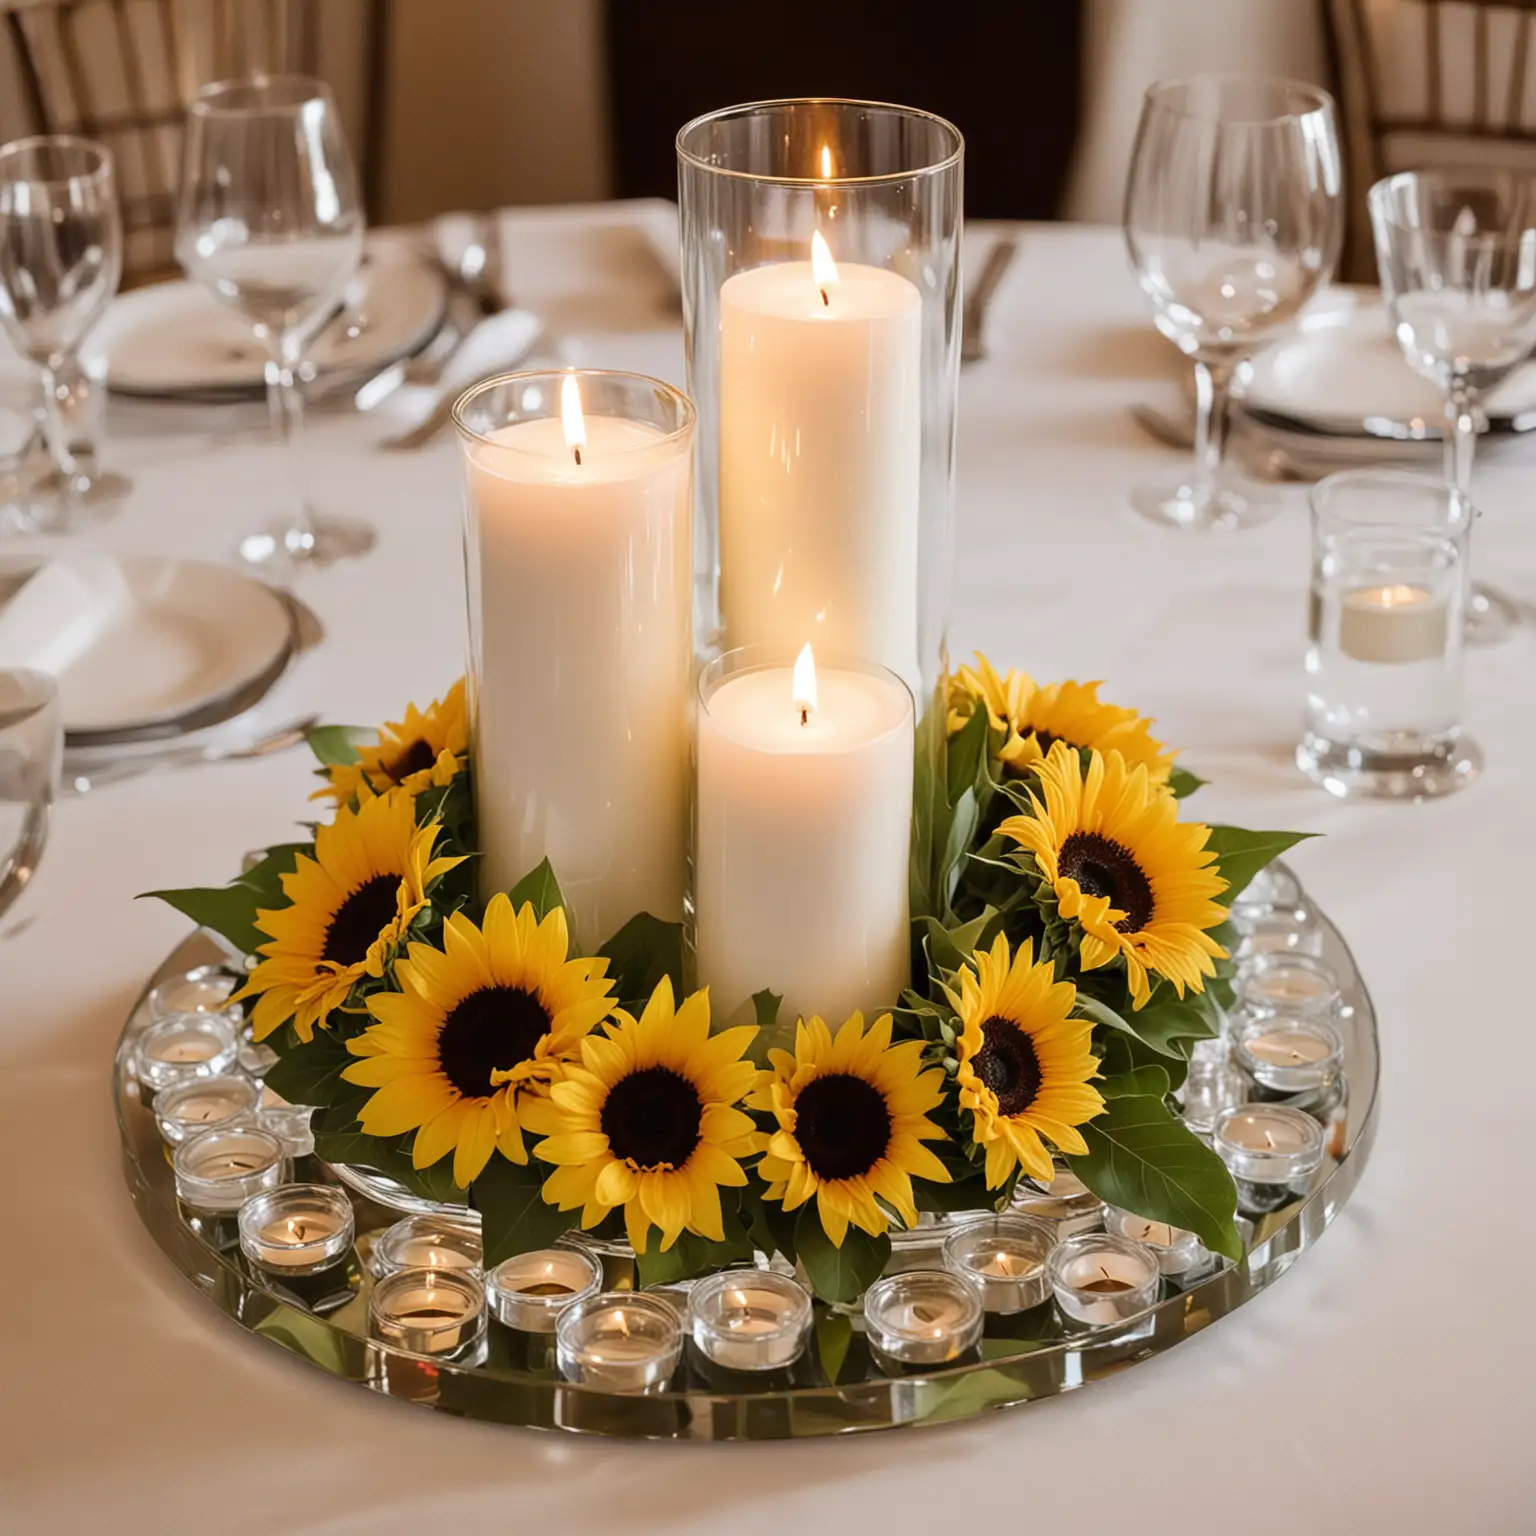 elegant wedding centerpiece with floating candle discs and sunflowers